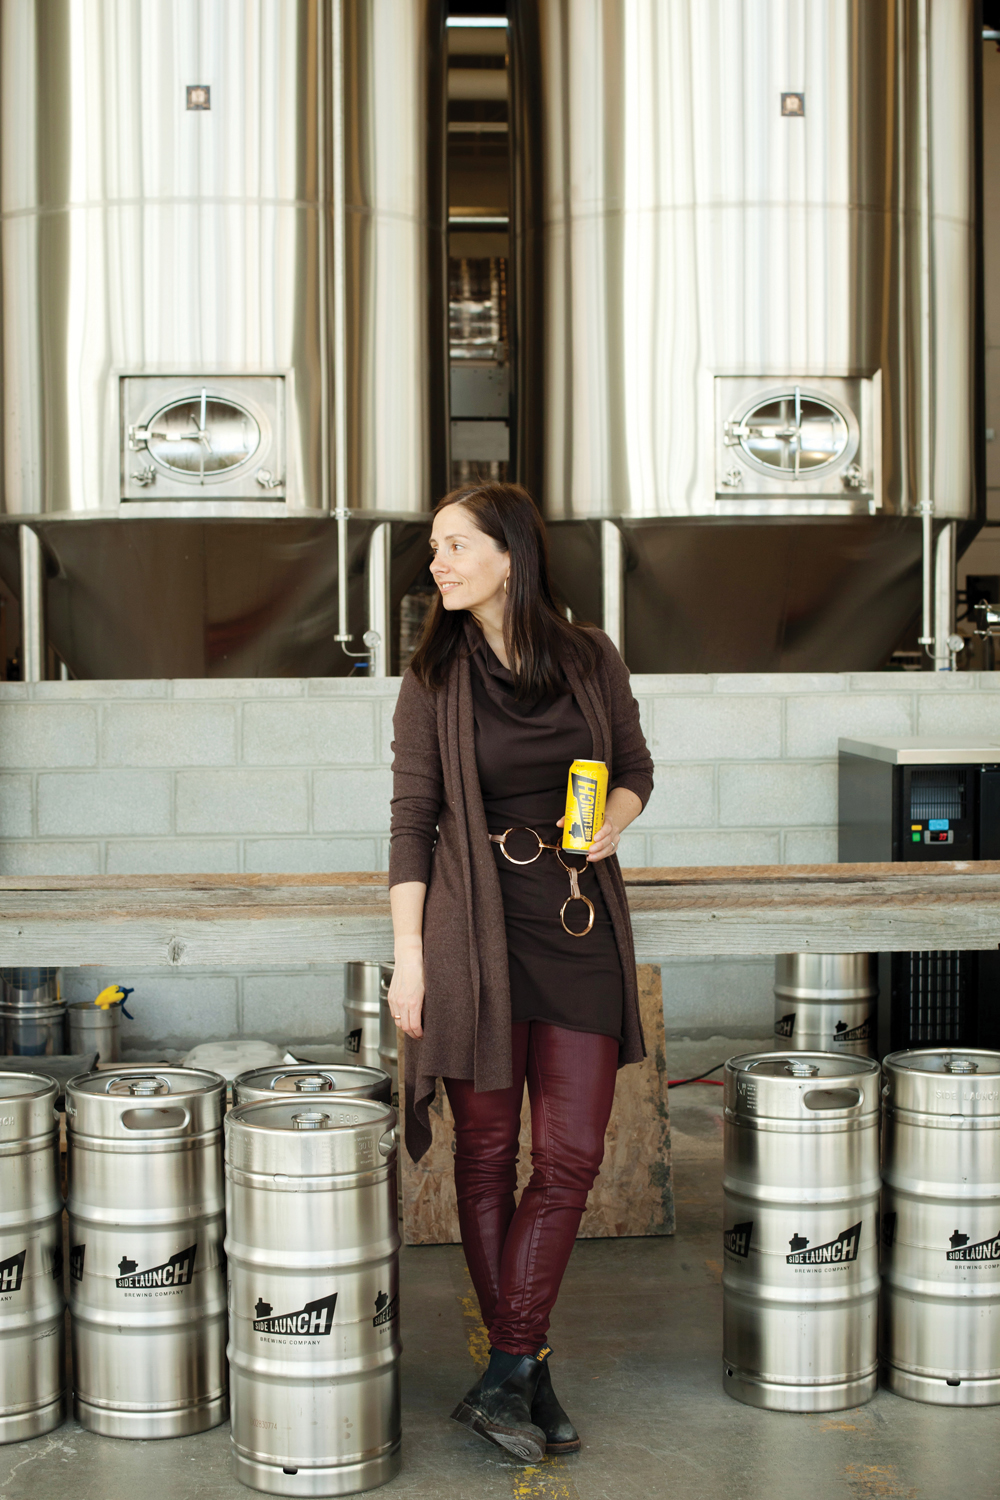 Garnet Pratt Siddall, president and CEO of Side Launch Brewing Co., has her sights set on the big league of craft brewing. Side Launch’s dark lager won a gold medal at this year’s Ontario Brewery Awards and its wheat beer won silver.